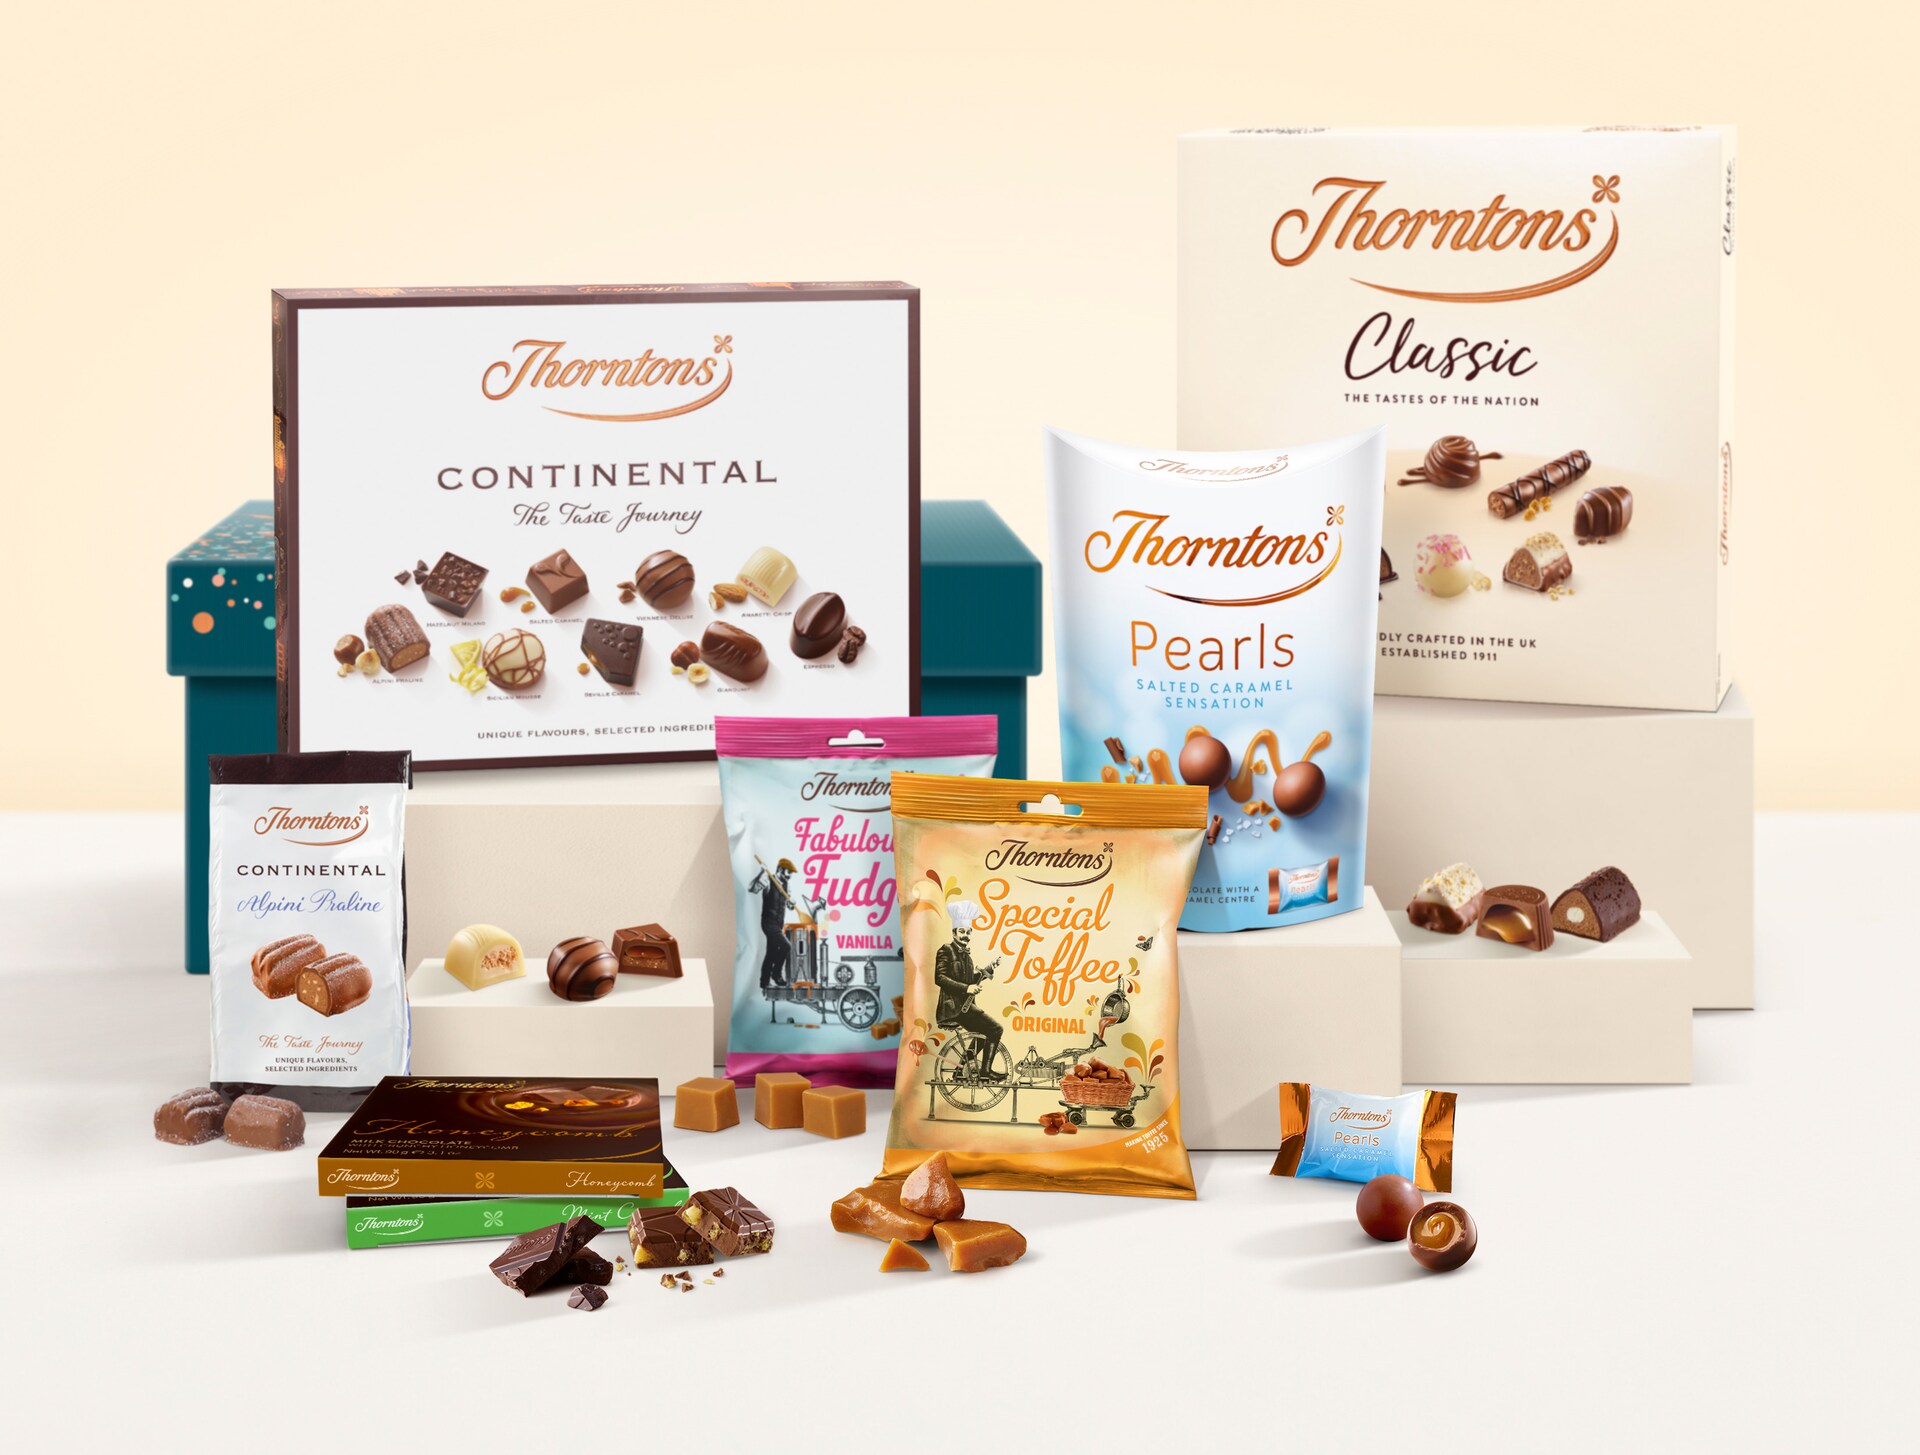 https://www.thorntons.com/medias/sys_master/images/h3a/h1f/8909748109342/GB55077_main/GB55077-main.jpg?resize=ProductGridComponent